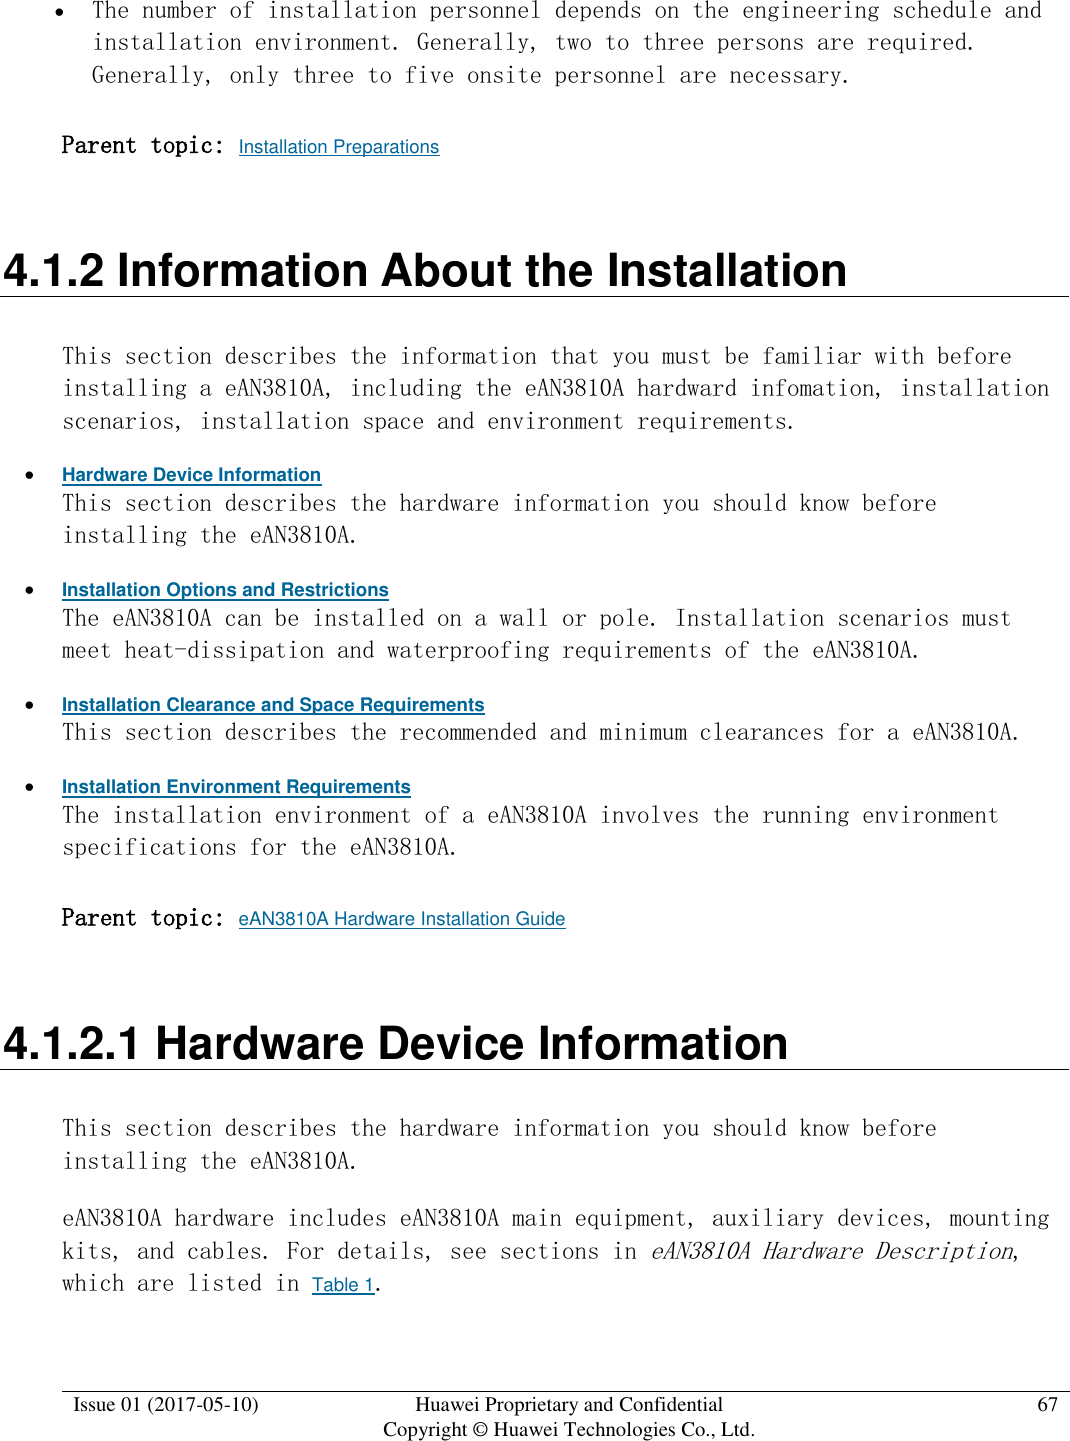  Issue 01 (2017-05-10) Huawei Proprietary and Confidential      Copyright © Huawei Technologies Co., Ltd. 67   The number of installation personnel depends on the engineering schedule and installation environment. Generally, two to three persons are required. Generally, only three to five onsite personnel are necessary.  Parent topic: Installation Preparations 4.1.2 Information About the Installation This section describes the information that you must be familiar with before installing a eAN3810A, including the eAN3810A hardward infomation, installation scenarios, installation space and environment requirements.  Hardware Device Information This section describes the hardware information you should know before installing the eAN3810A.  Installation Options and Restrictions The eAN3810A can be installed on a wall or pole. Installation scenarios must meet heat-dissipation and waterproofing requirements of the eAN3810A.  Installation Clearance and Space Requirements This section describes the recommended and minimum clearances for a eAN3810A.  Installation Environment Requirements The installation environment of a eAN3810A involves the running environment specifications for the eAN3810A. Parent topic: eAN3810A Hardware Installation Guide 4.1.2.1 Hardware Device Information This section describes the hardware information you should know before installing the eAN3810A. eAN3810A hardware includes eAN3810A main equipment, auxiliary devices, mounting kits, and cables. For details, see sections in eAN3810A Hardware Description, which are listed in Table 1.  